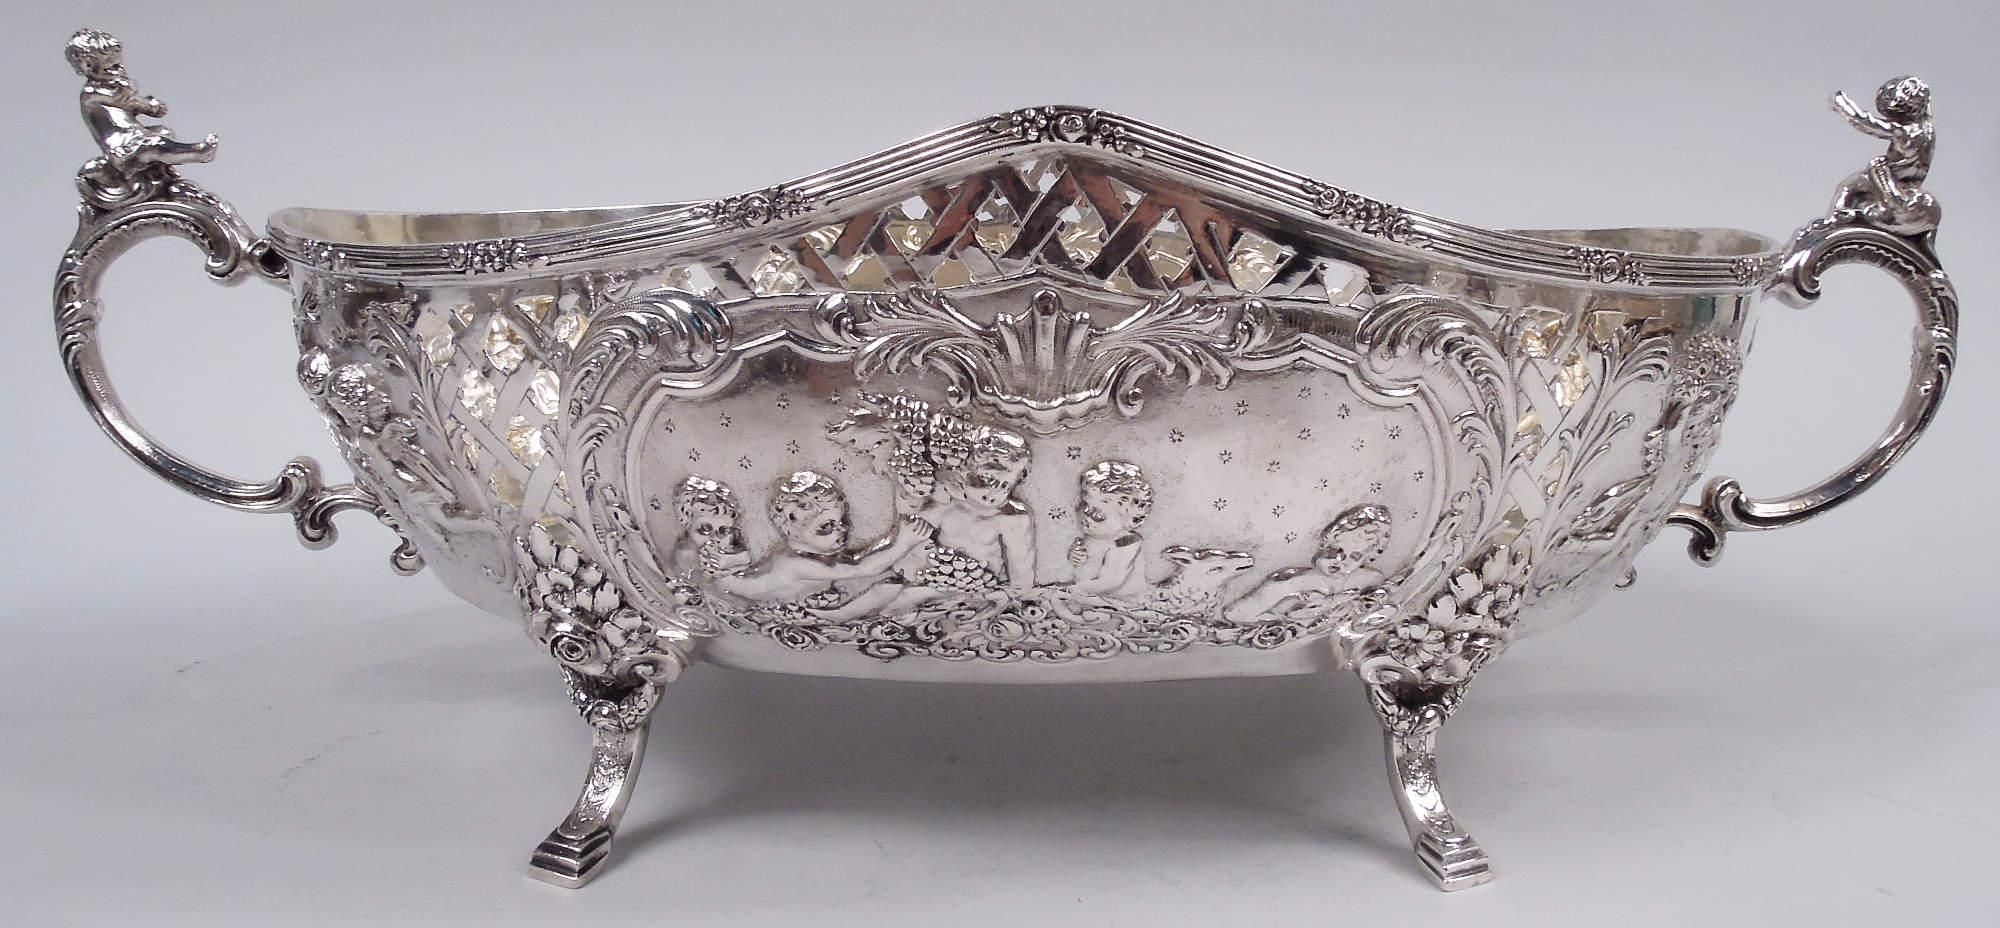 Antique German Classical Silver Centerpiece Bowl C 1910 In Good Condition For Sale In New York, NY